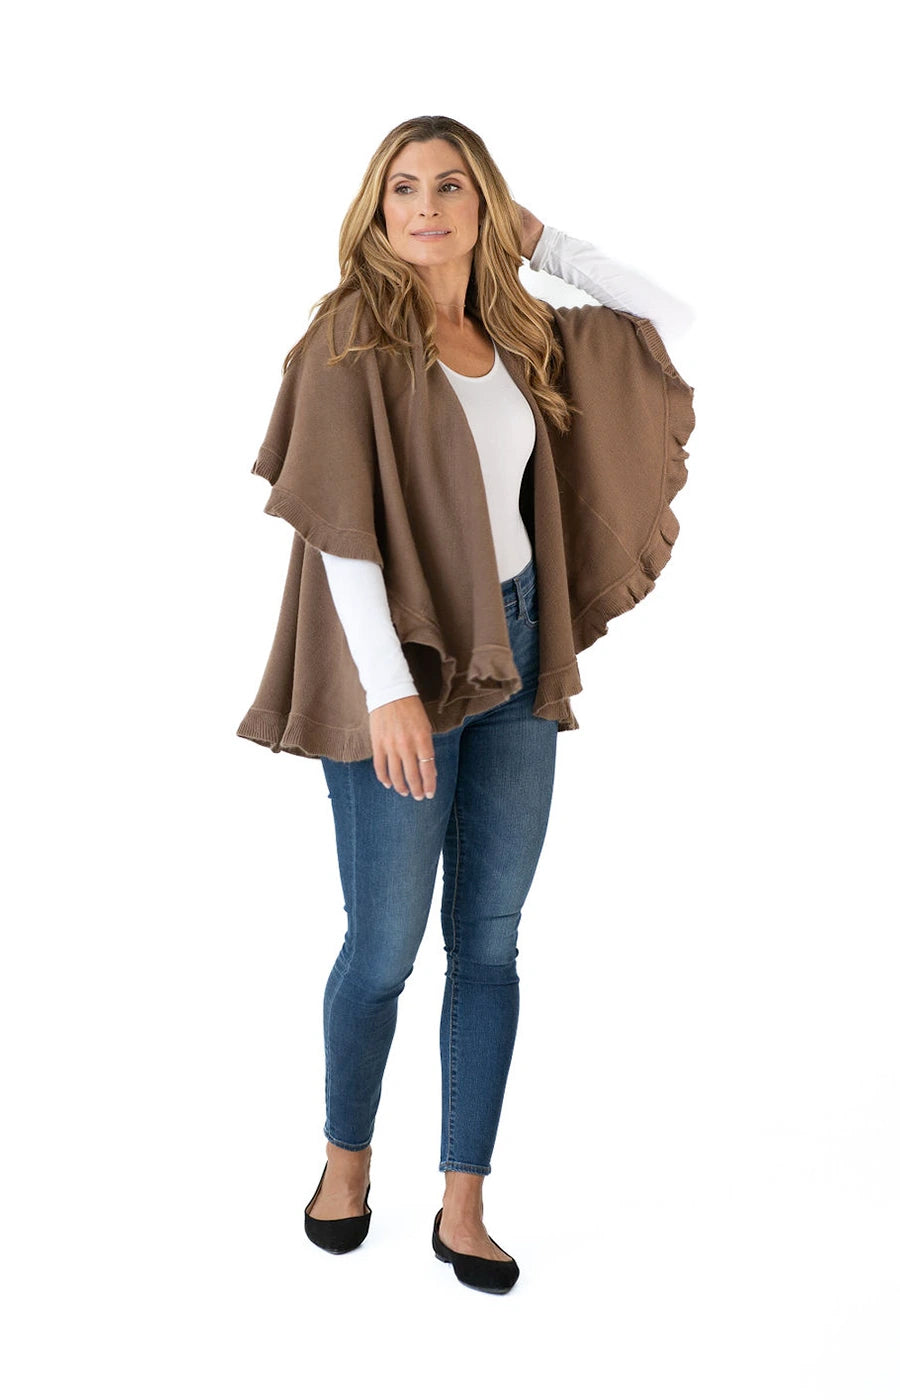 Shawl Sweater Vest in Taupe with Ruffle Trim-Customer Favorite Shawls For Over 10 Years